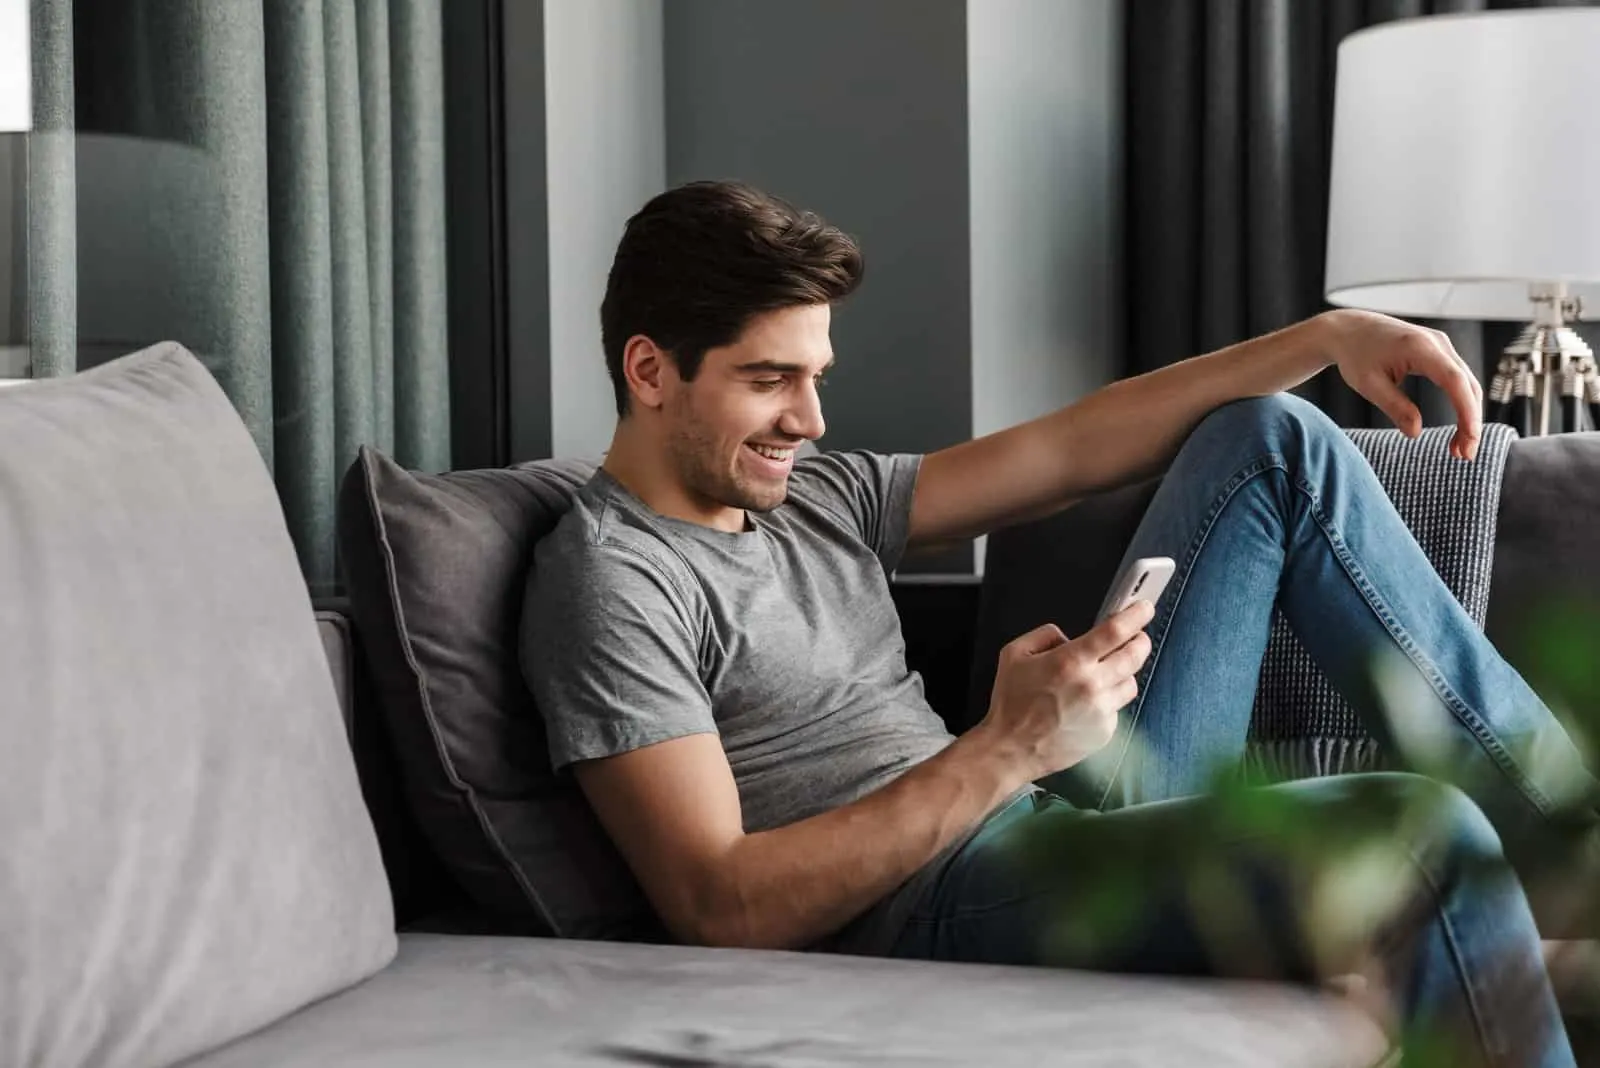 a smiling man sits on the couch and keys on the phone